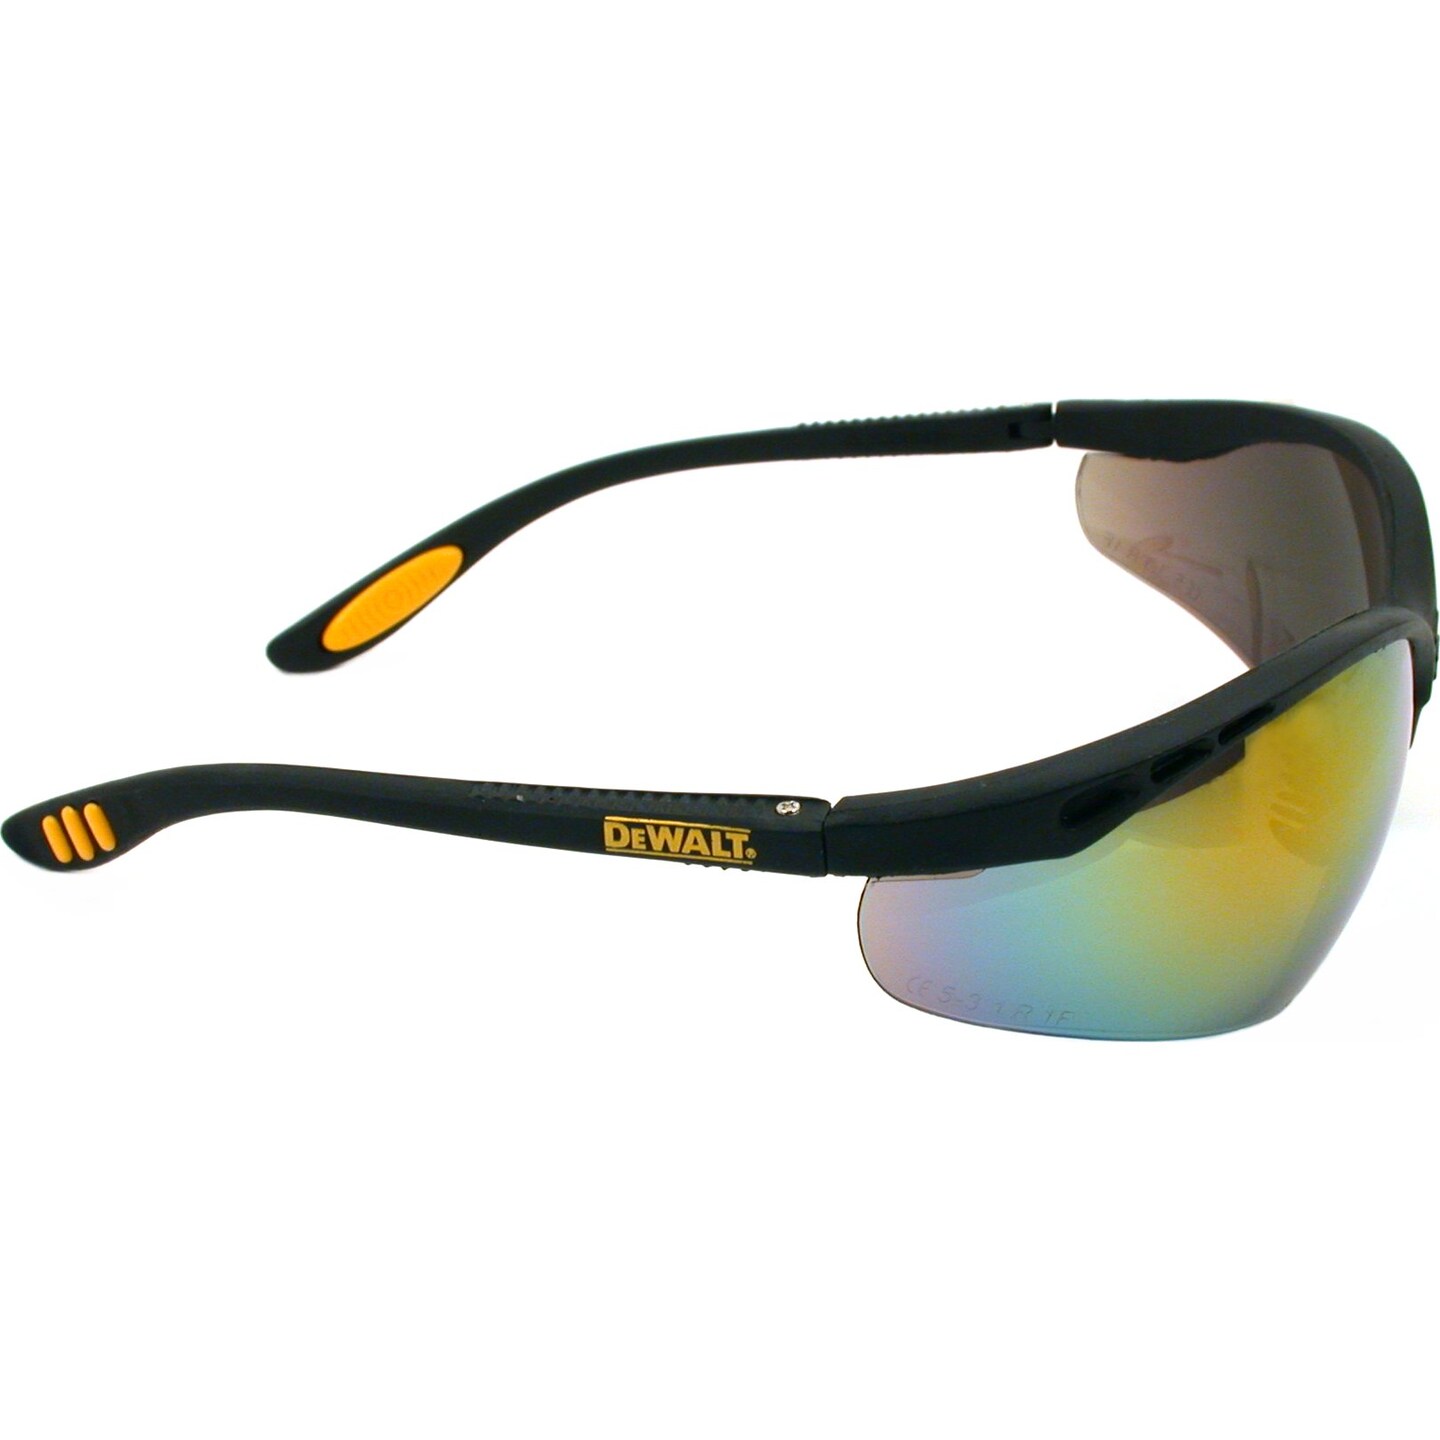 Dewalt Dpg58 6c Reinforcer Fire Mirror High Performance Protective Safety Glasses With Rubber